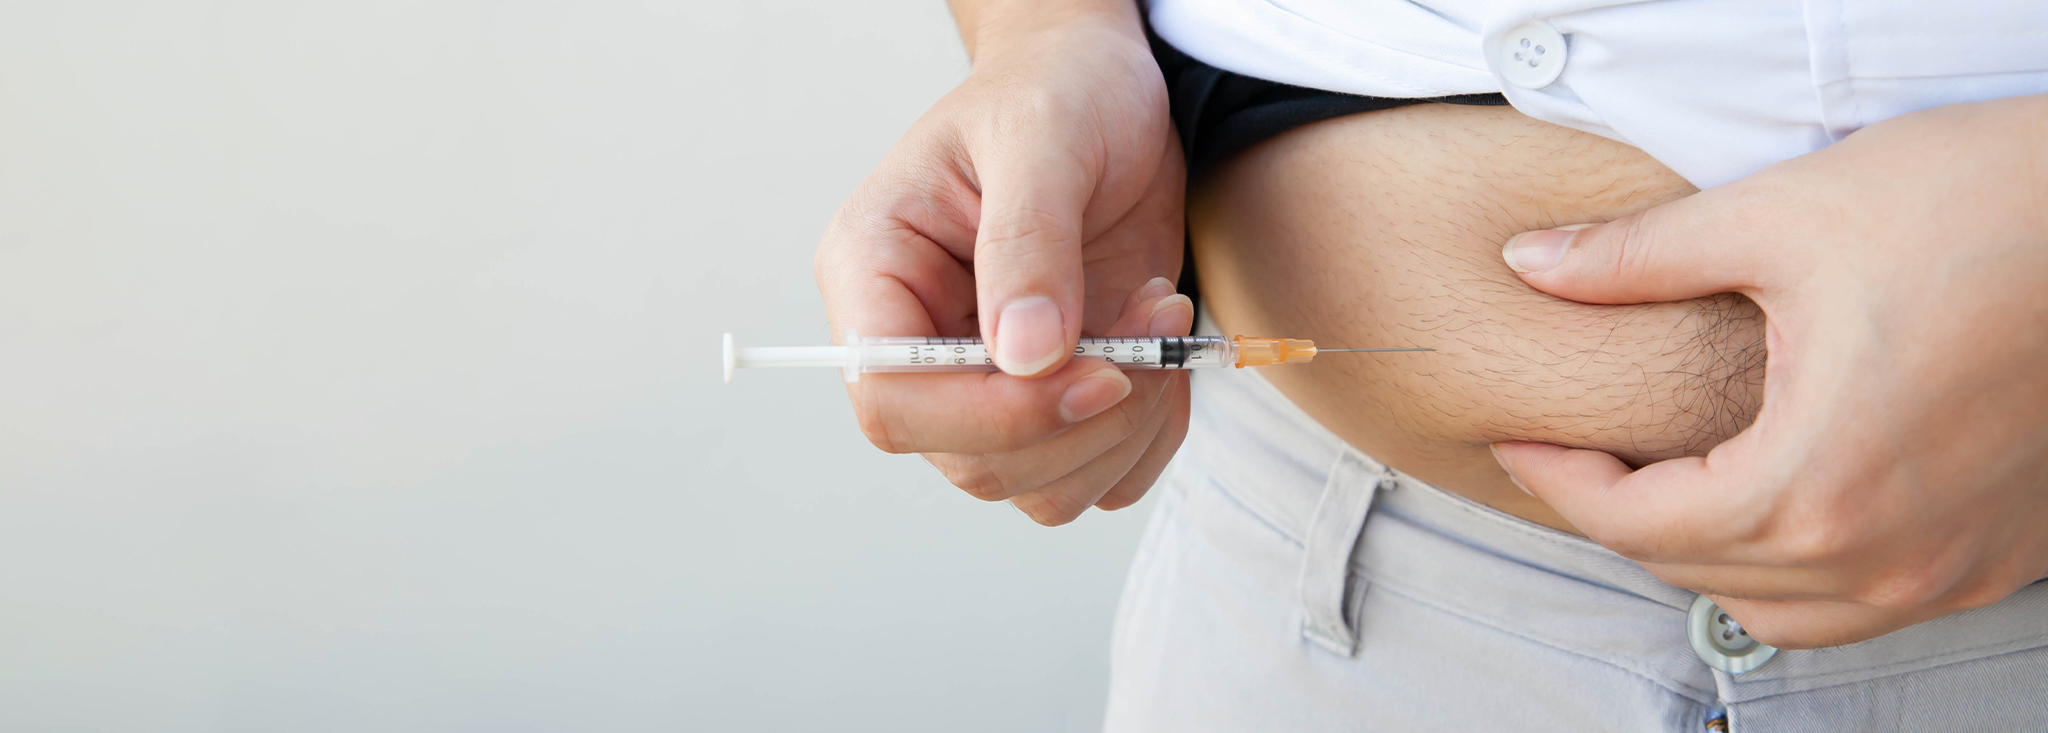 Overcoming Fear of Insulin Injections